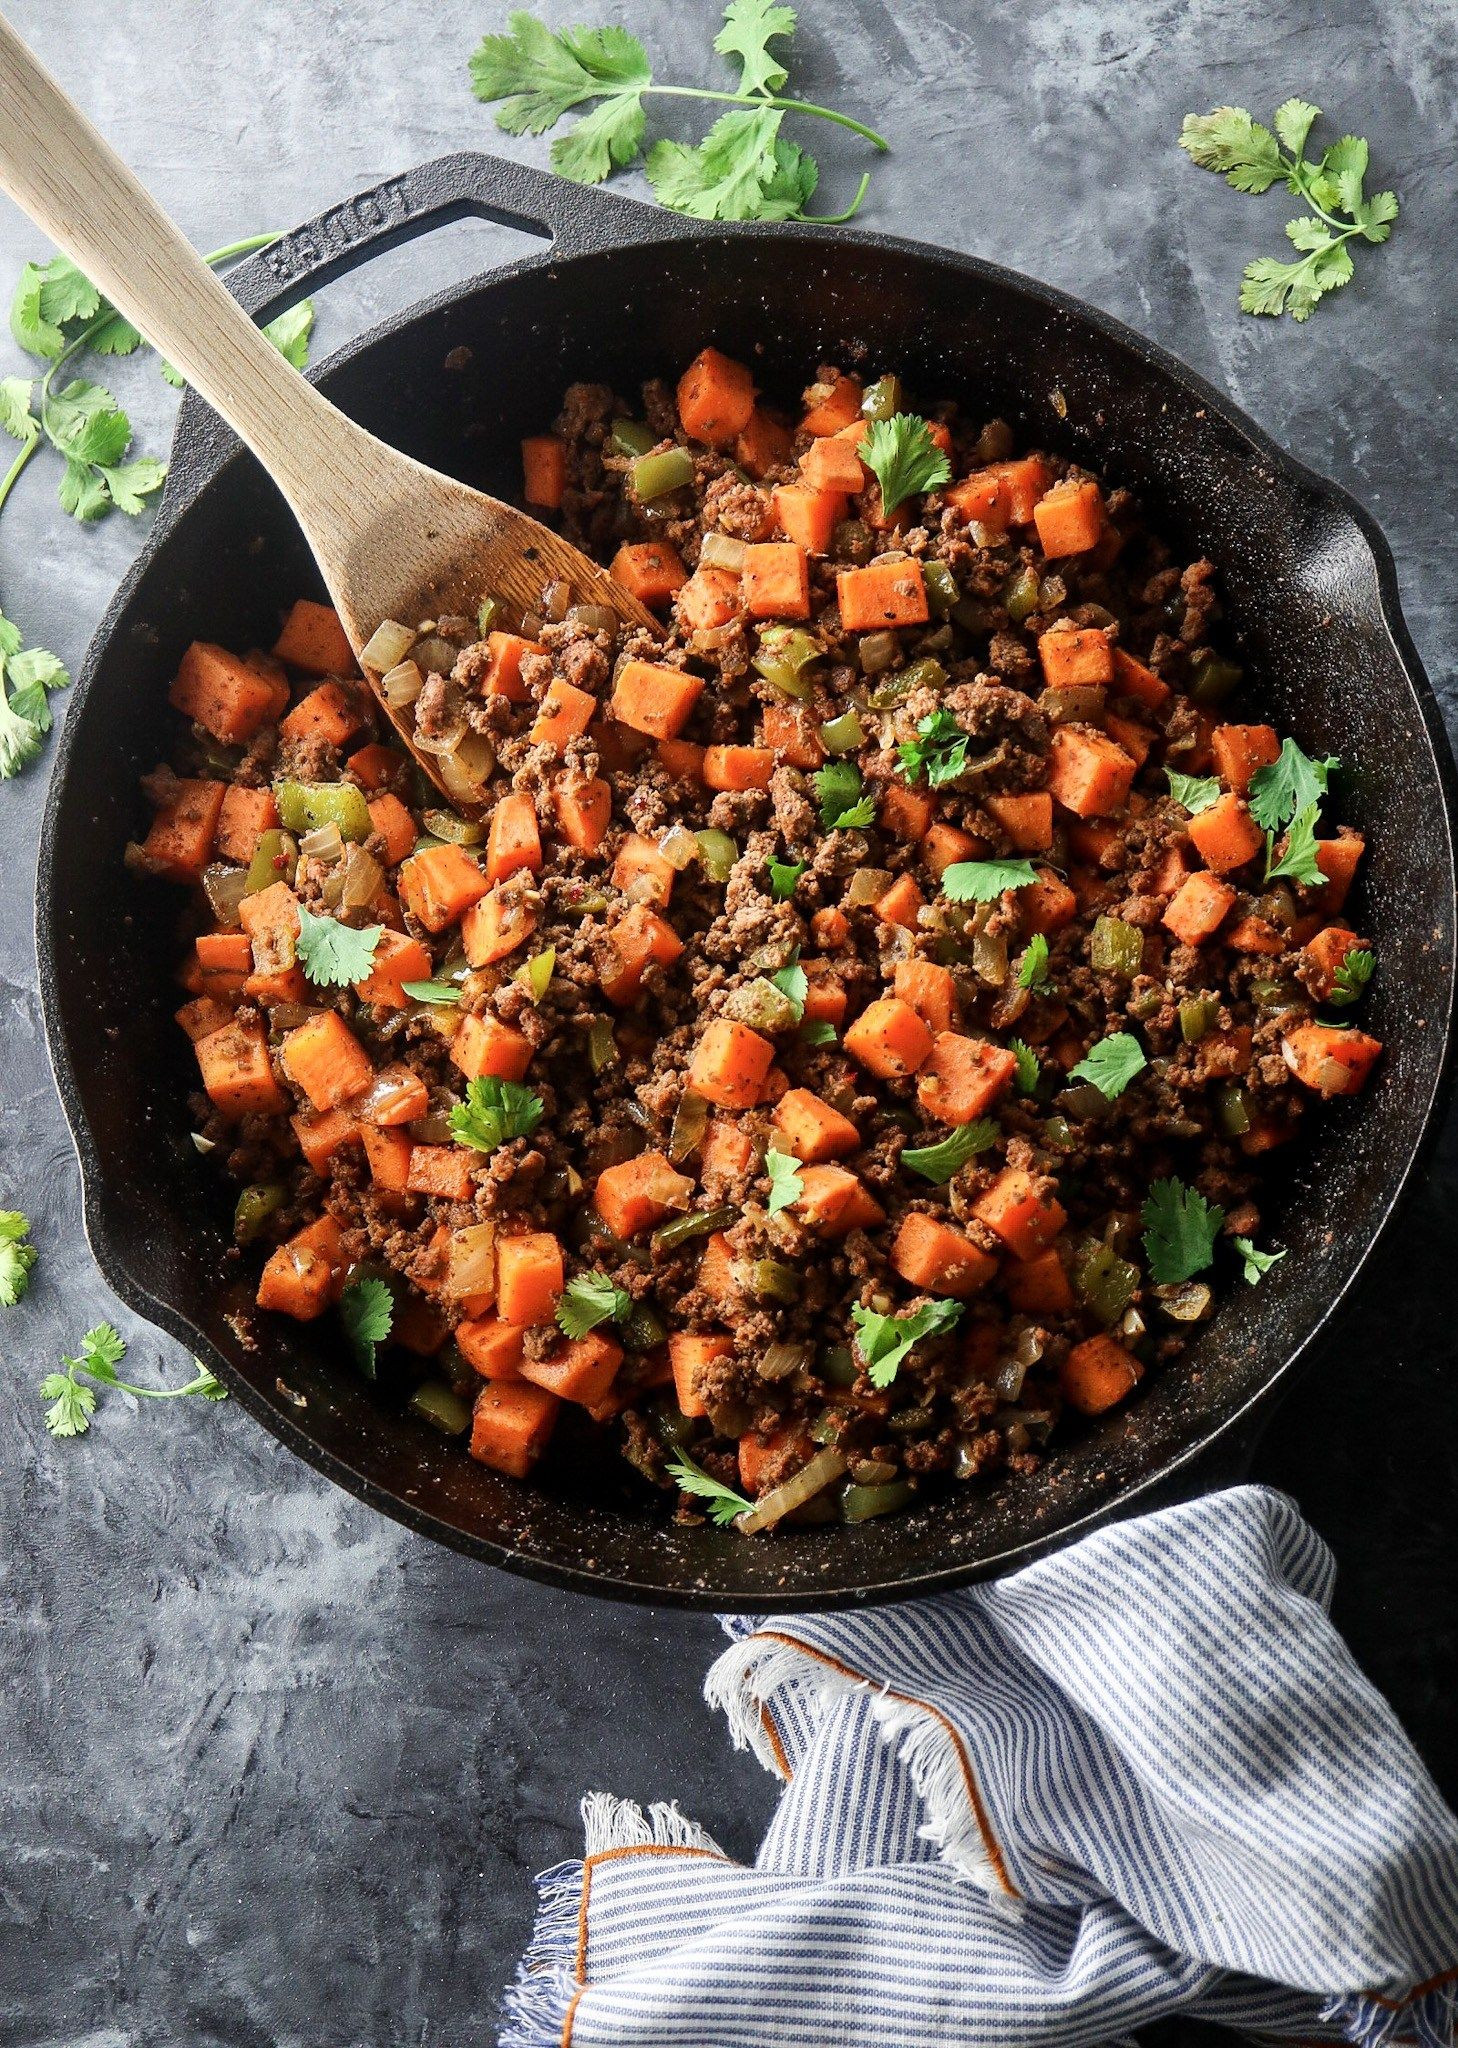 Ground Beef Hash Recipe Elegant Ground Beef and Sweet Potato Hash Tipps In the Kitch